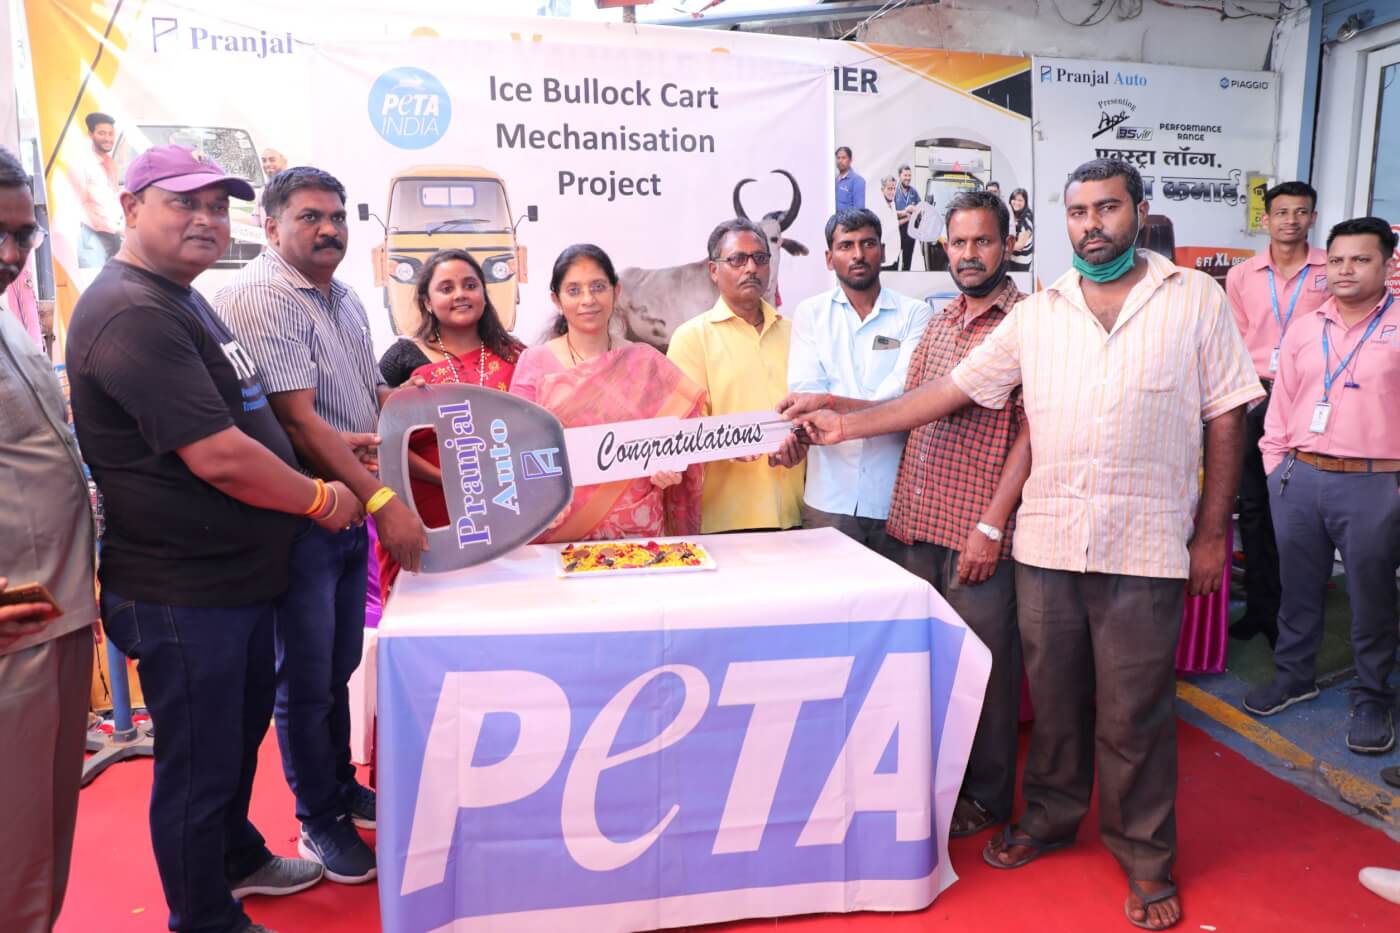 Victory! PETA India Replaces Mumbai Ice-Hauling Bulls With Motorised Vehicles in Ceremony Held With Local Politician